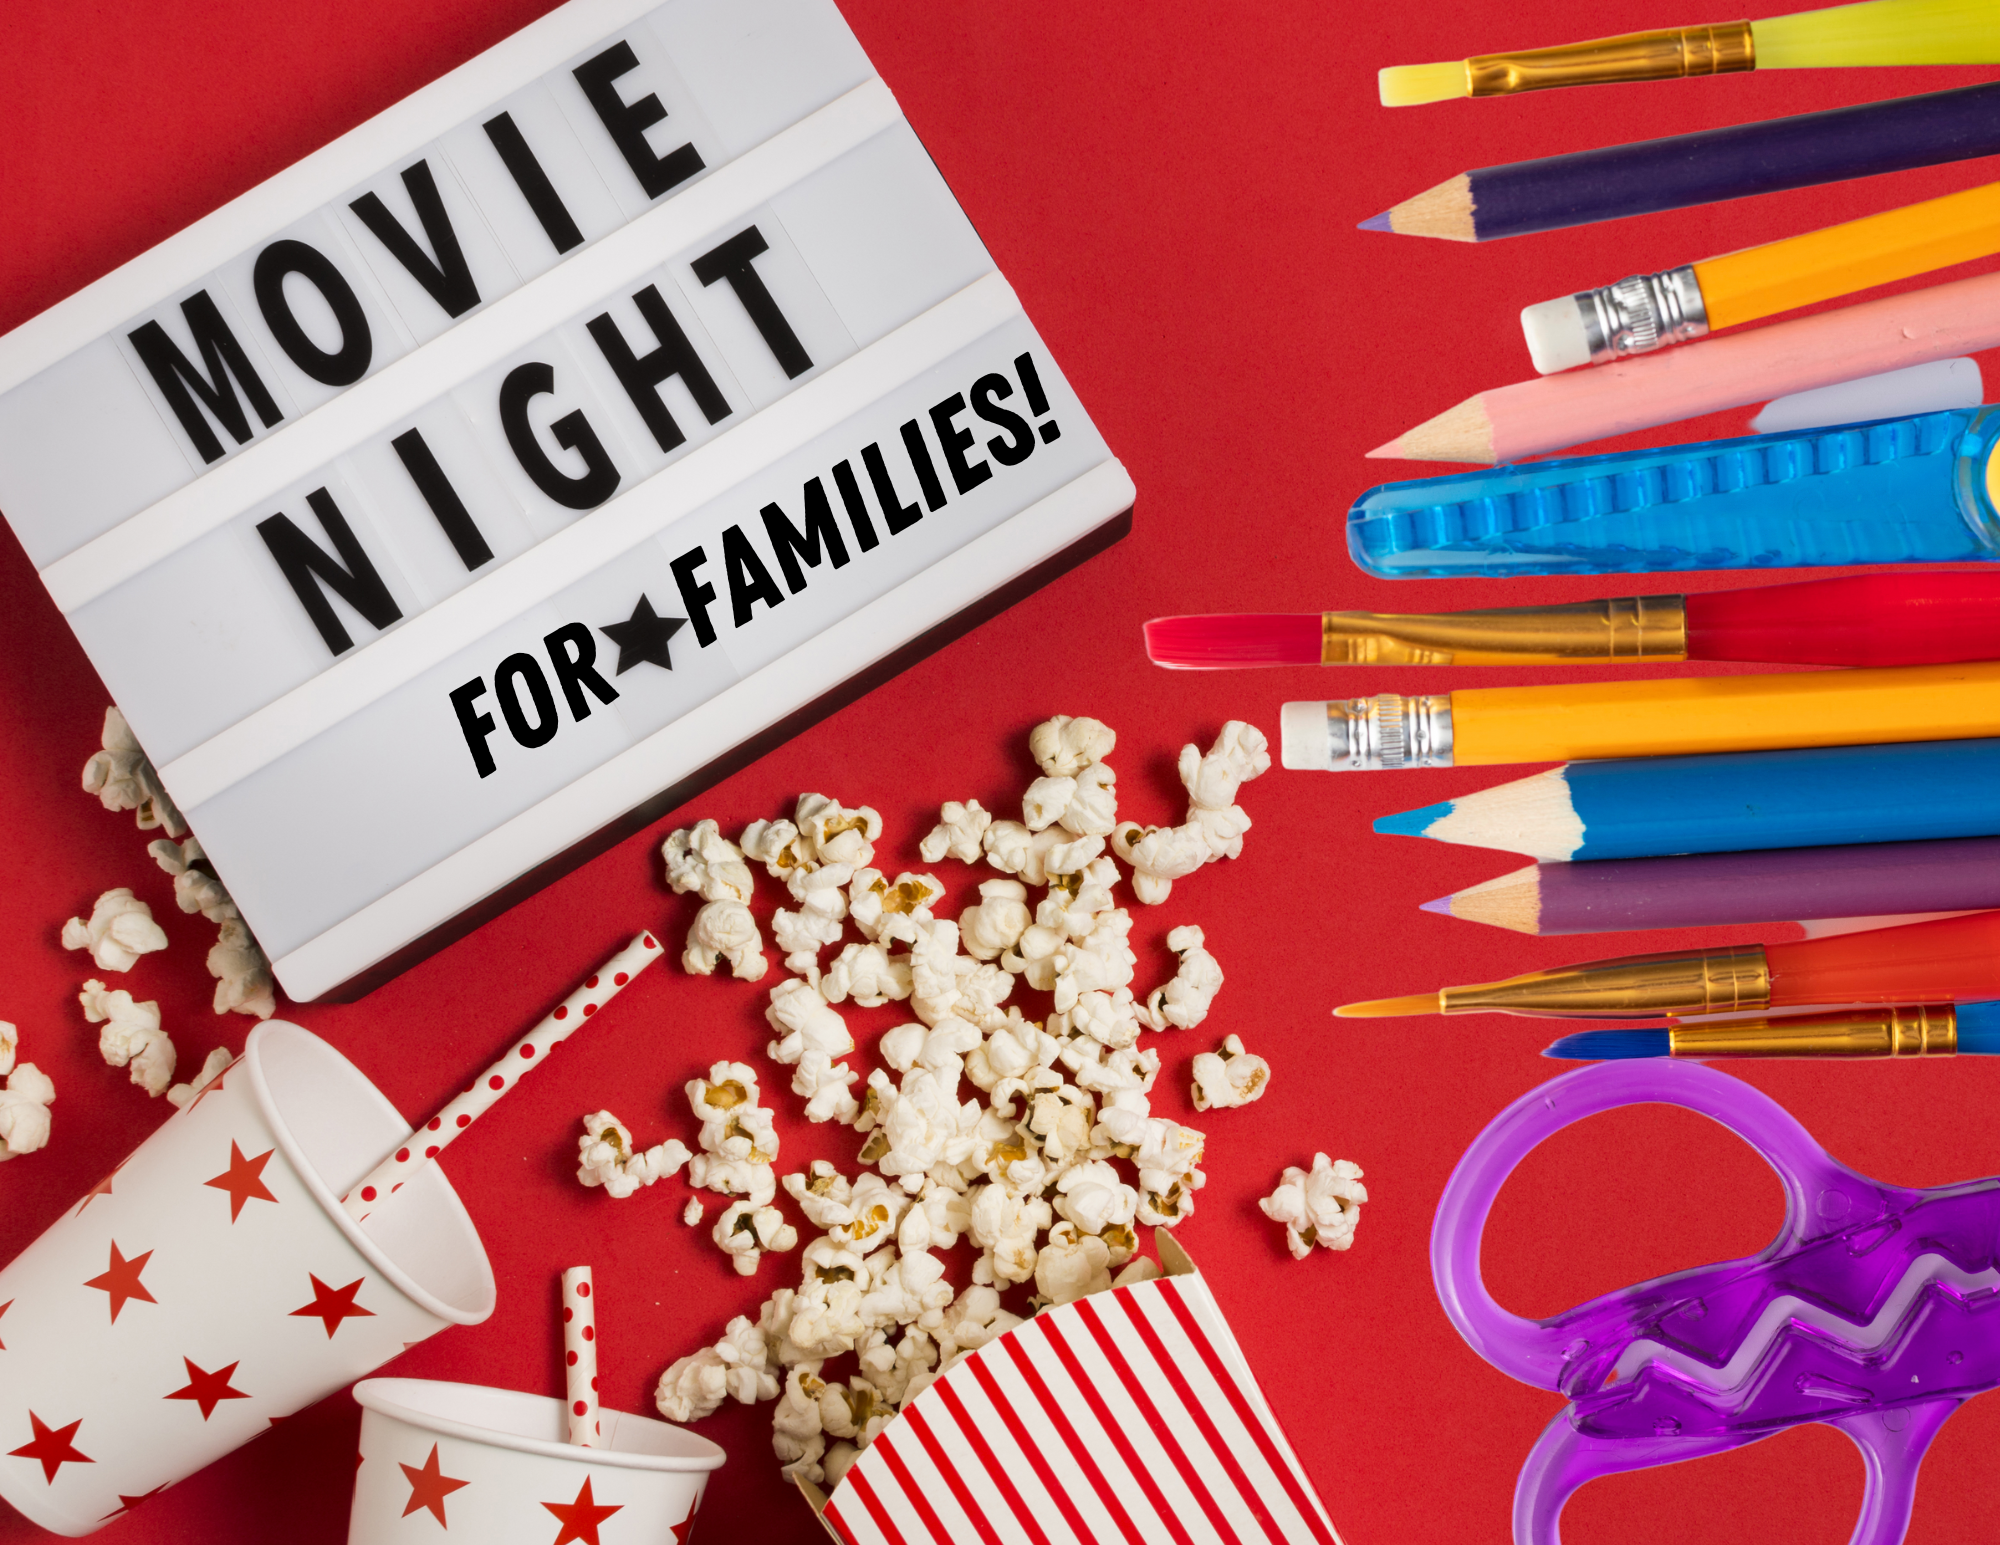 Sign reads "movie night for families" surrounded by popcorn and art supplies